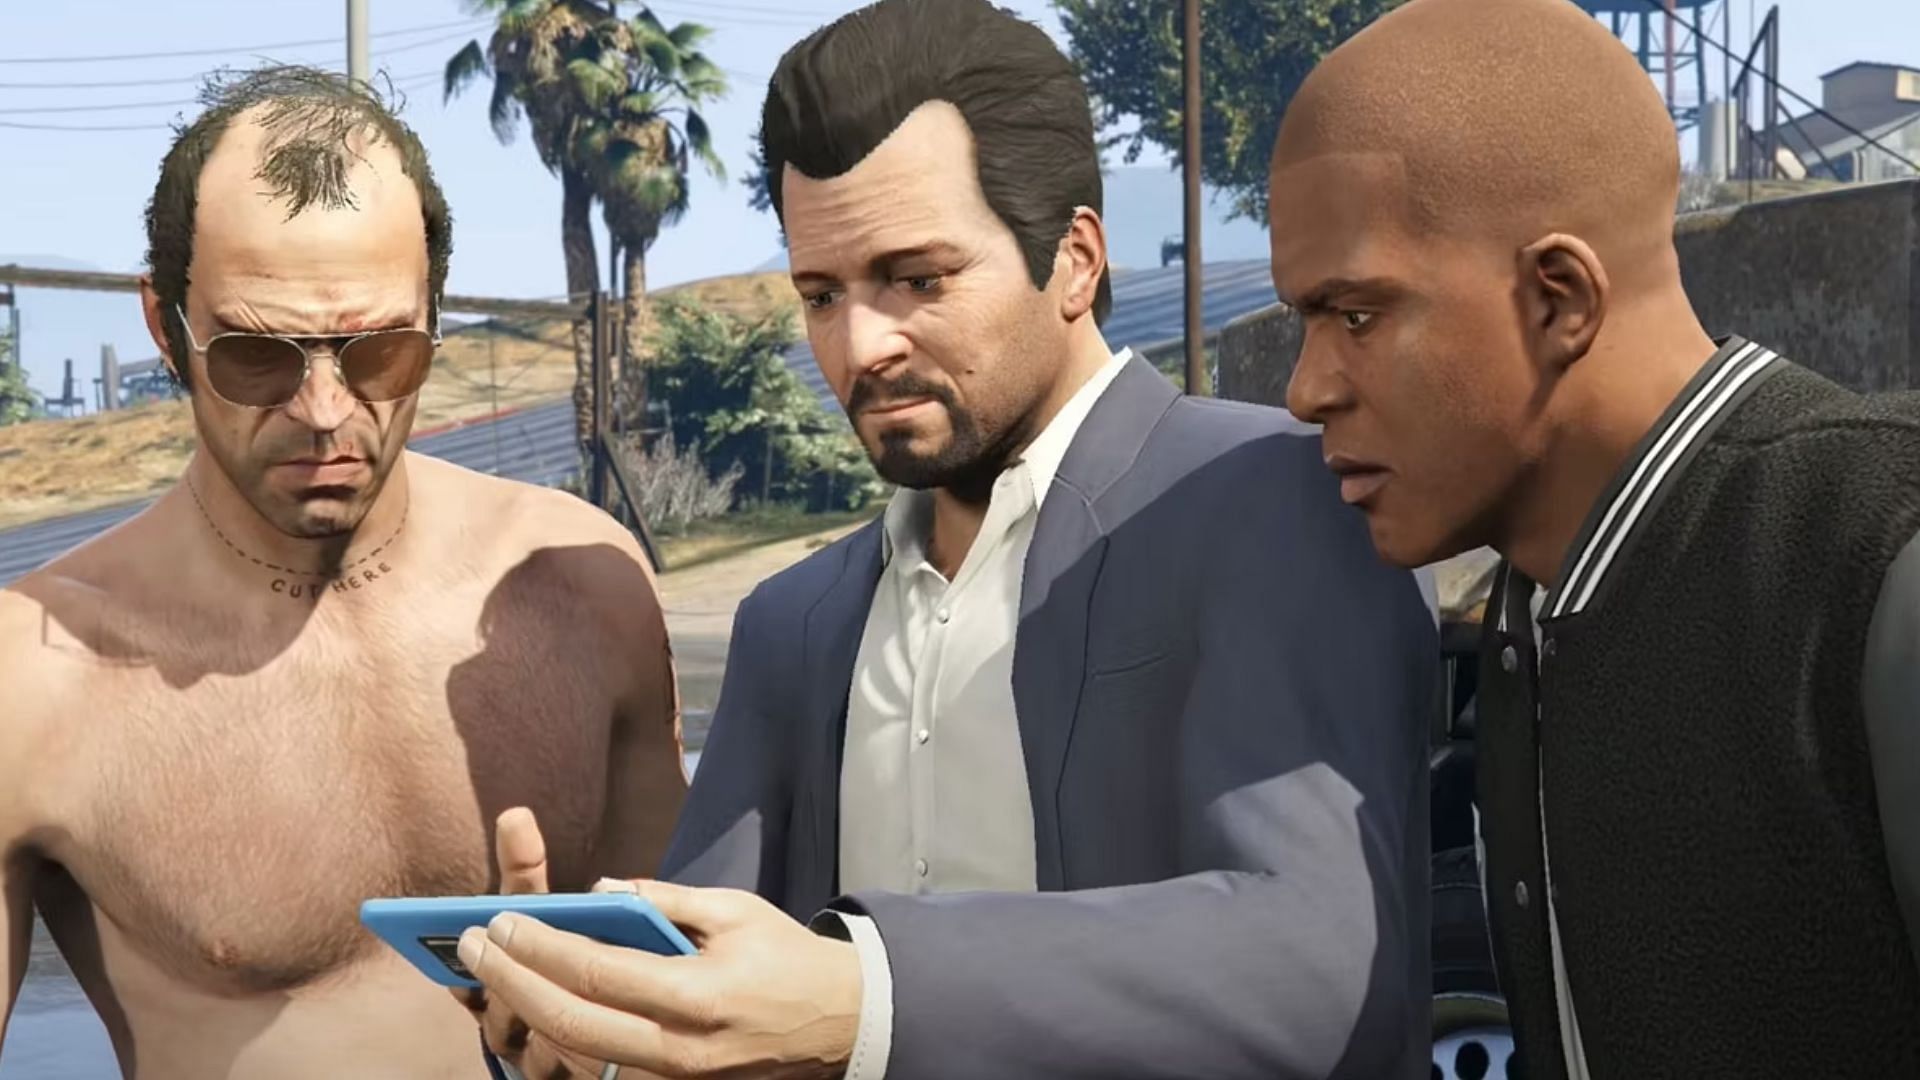 GTA 6 trailer release date is reportedly just 10 days away, fans can't  believe it